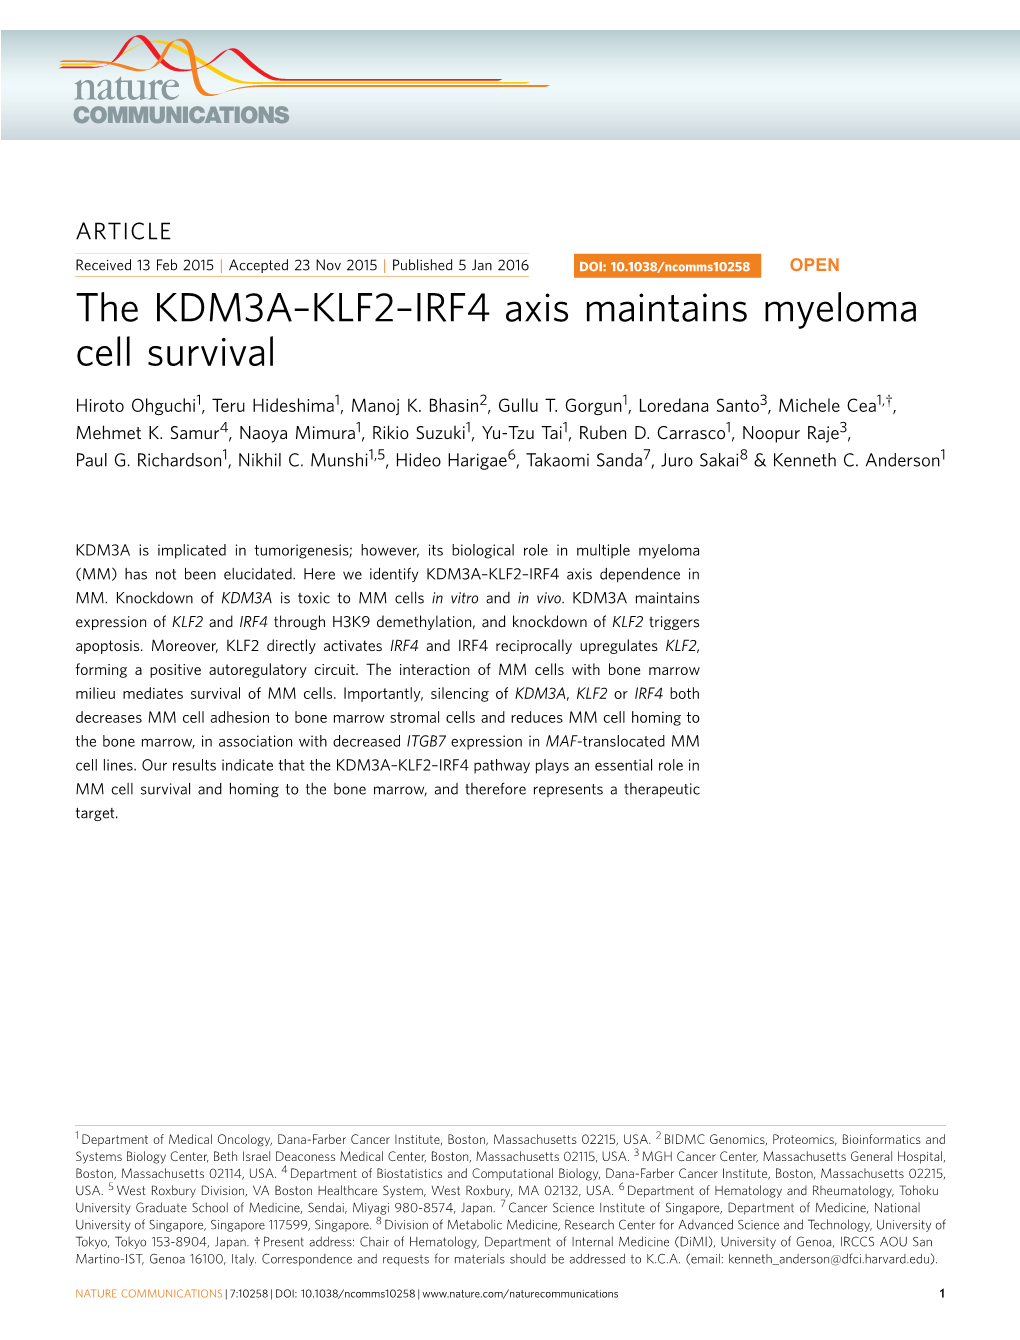 IRF4 Axis Maintains Myeloma Cell Survival